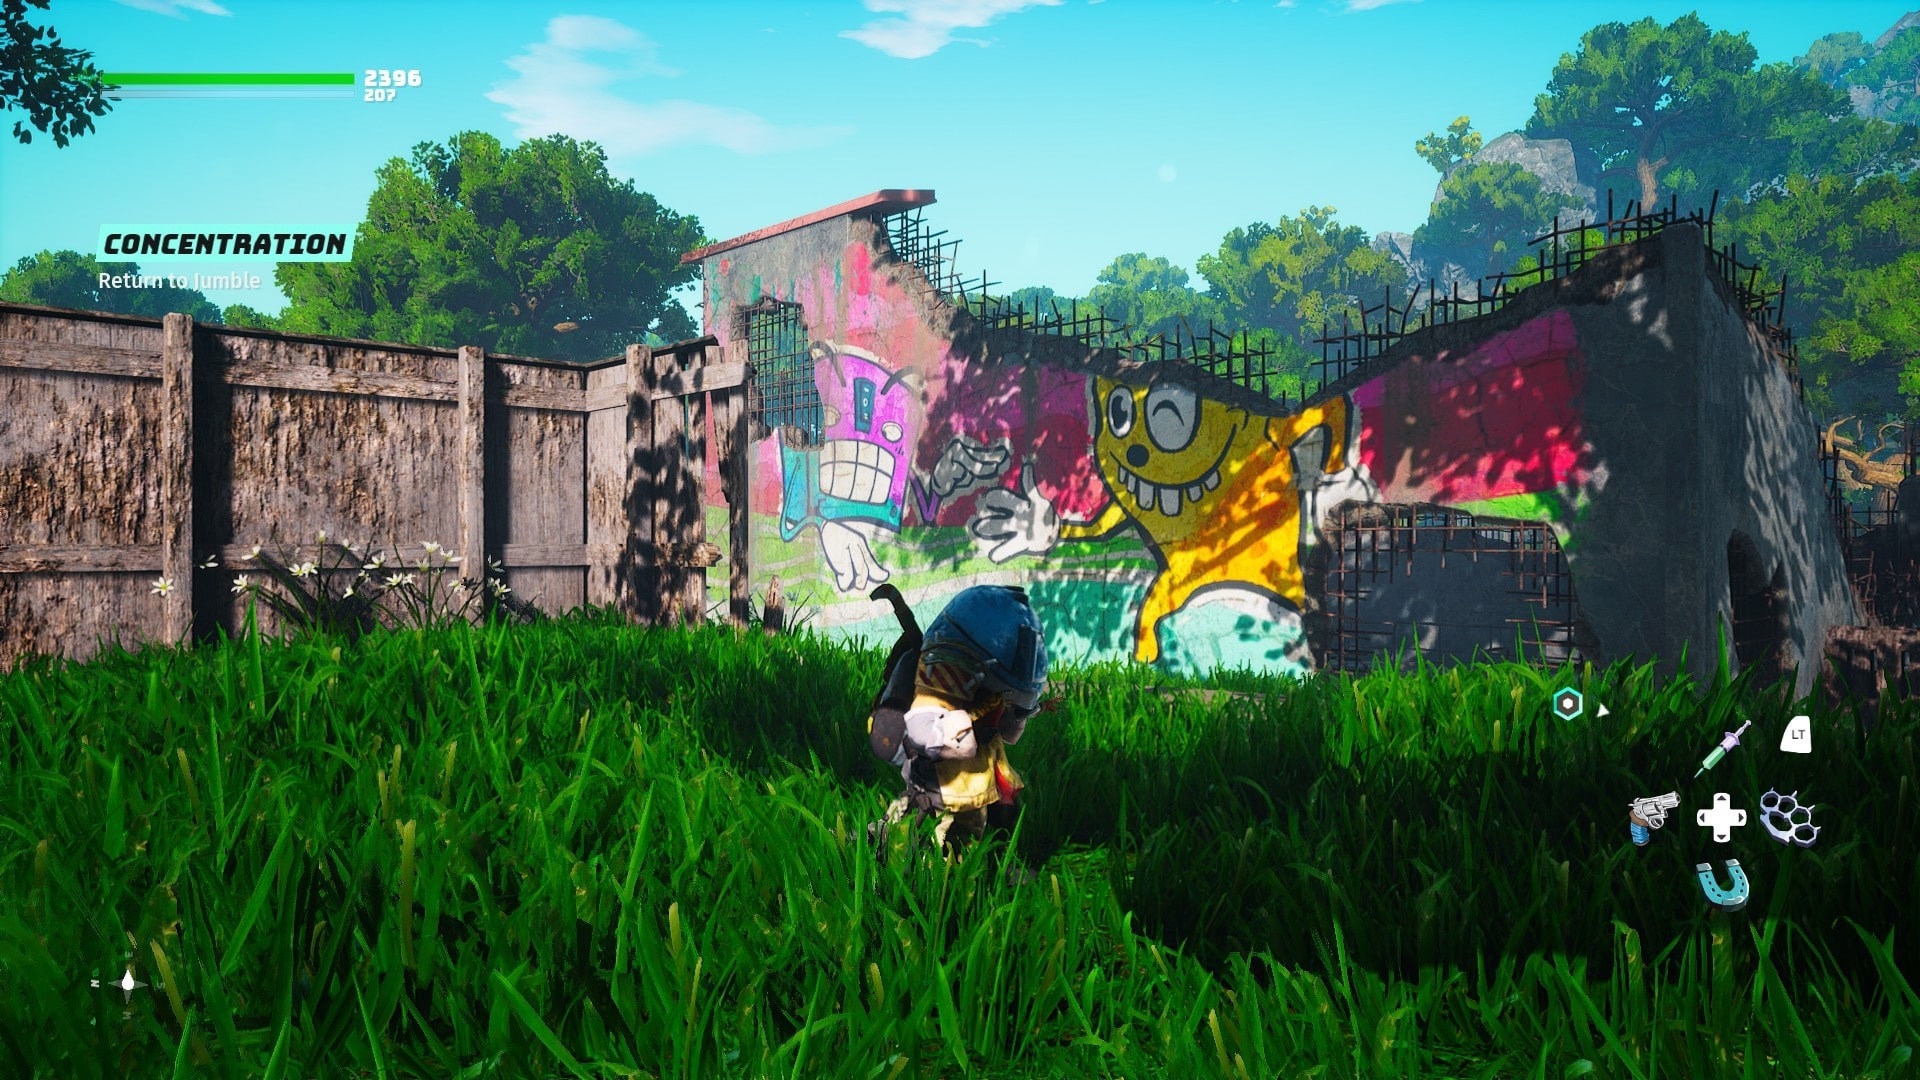 I'm totally into the billboards and the graffiti-covered ruins in the game world.